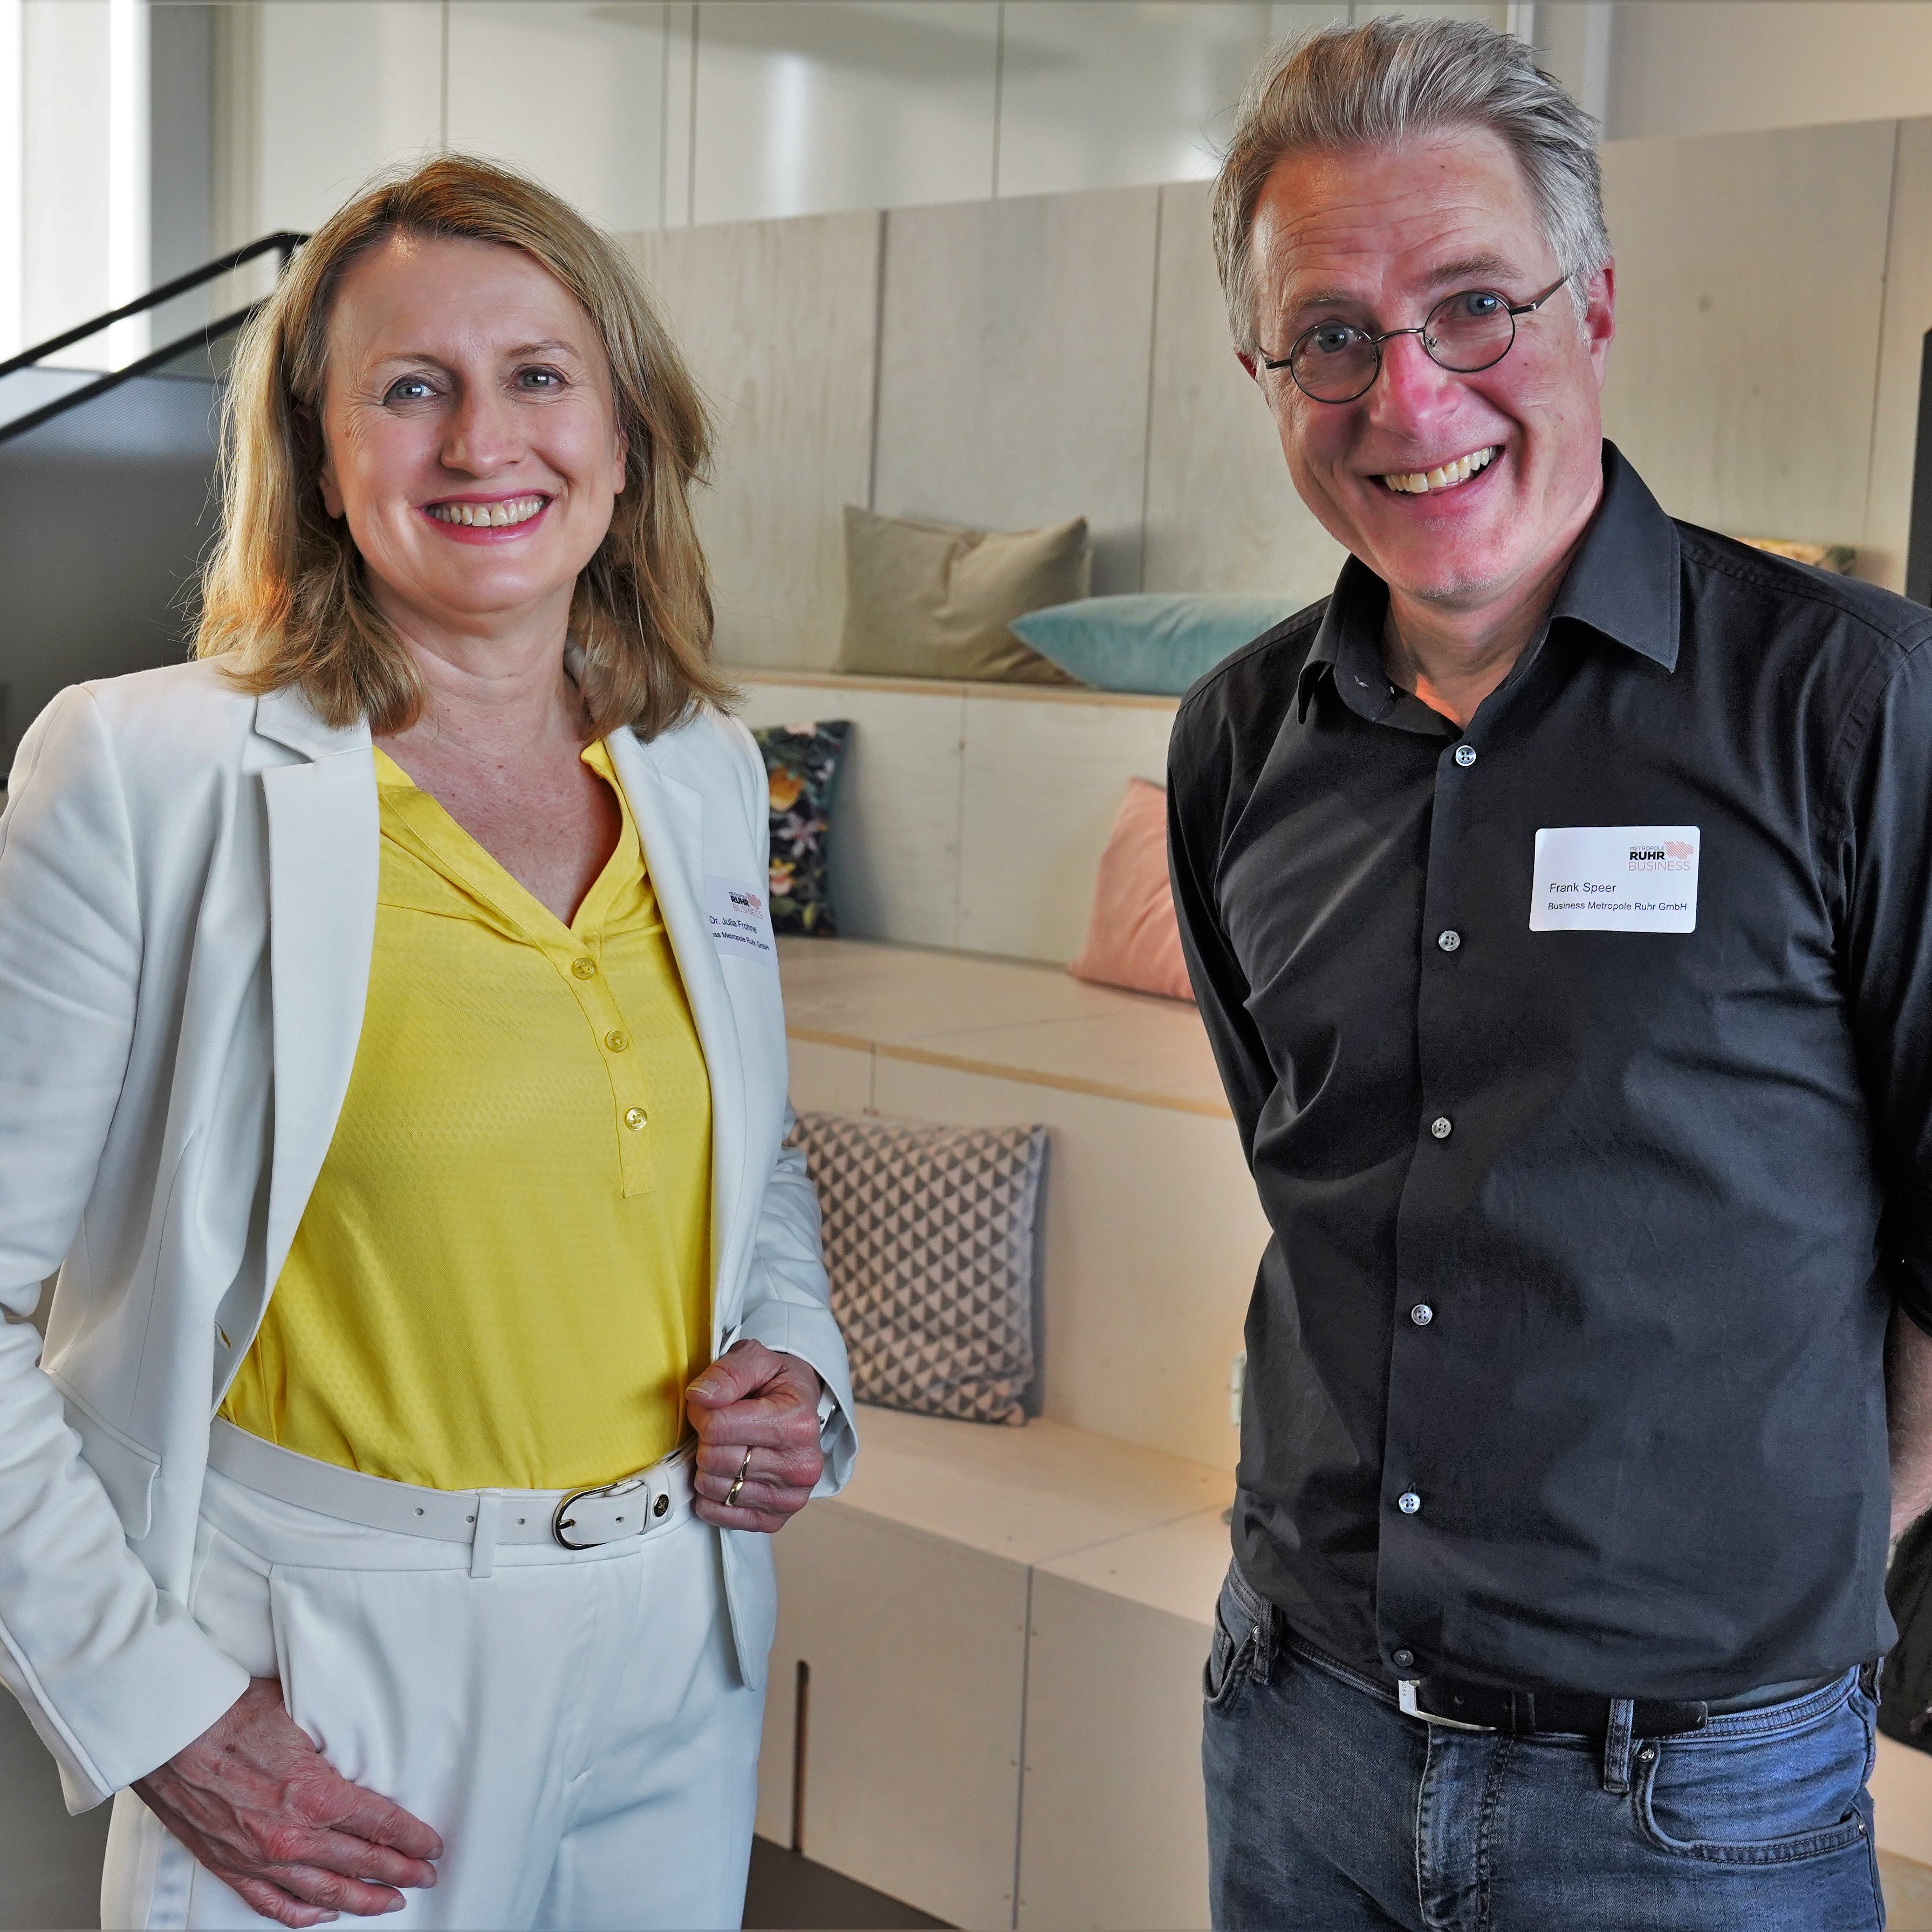 Julia Frohne with Frank Speer talk about the international activities of the Business Metropole Ruhr